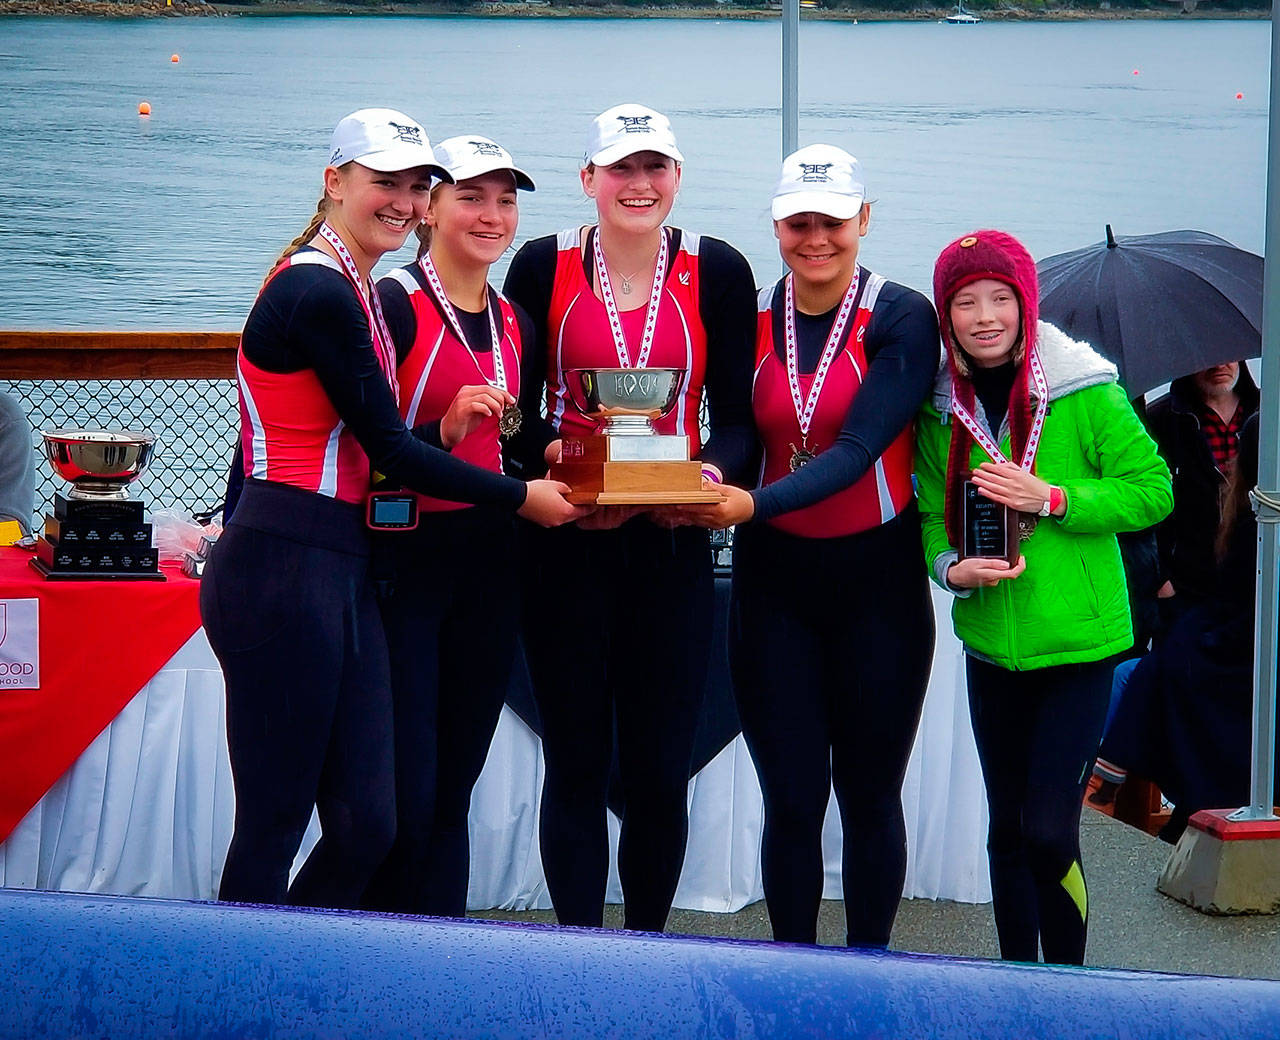 BBRC’s Kate Kelly, Gabrielle Graves, Ros Bellscheidt, Ava Lorentzen and coxswain Alex Ryan hold the Lady Logan Cup, which will now bear their names as the winners of the Brentwood 2018 U-17 quad. (Steve Tosterud Photo)